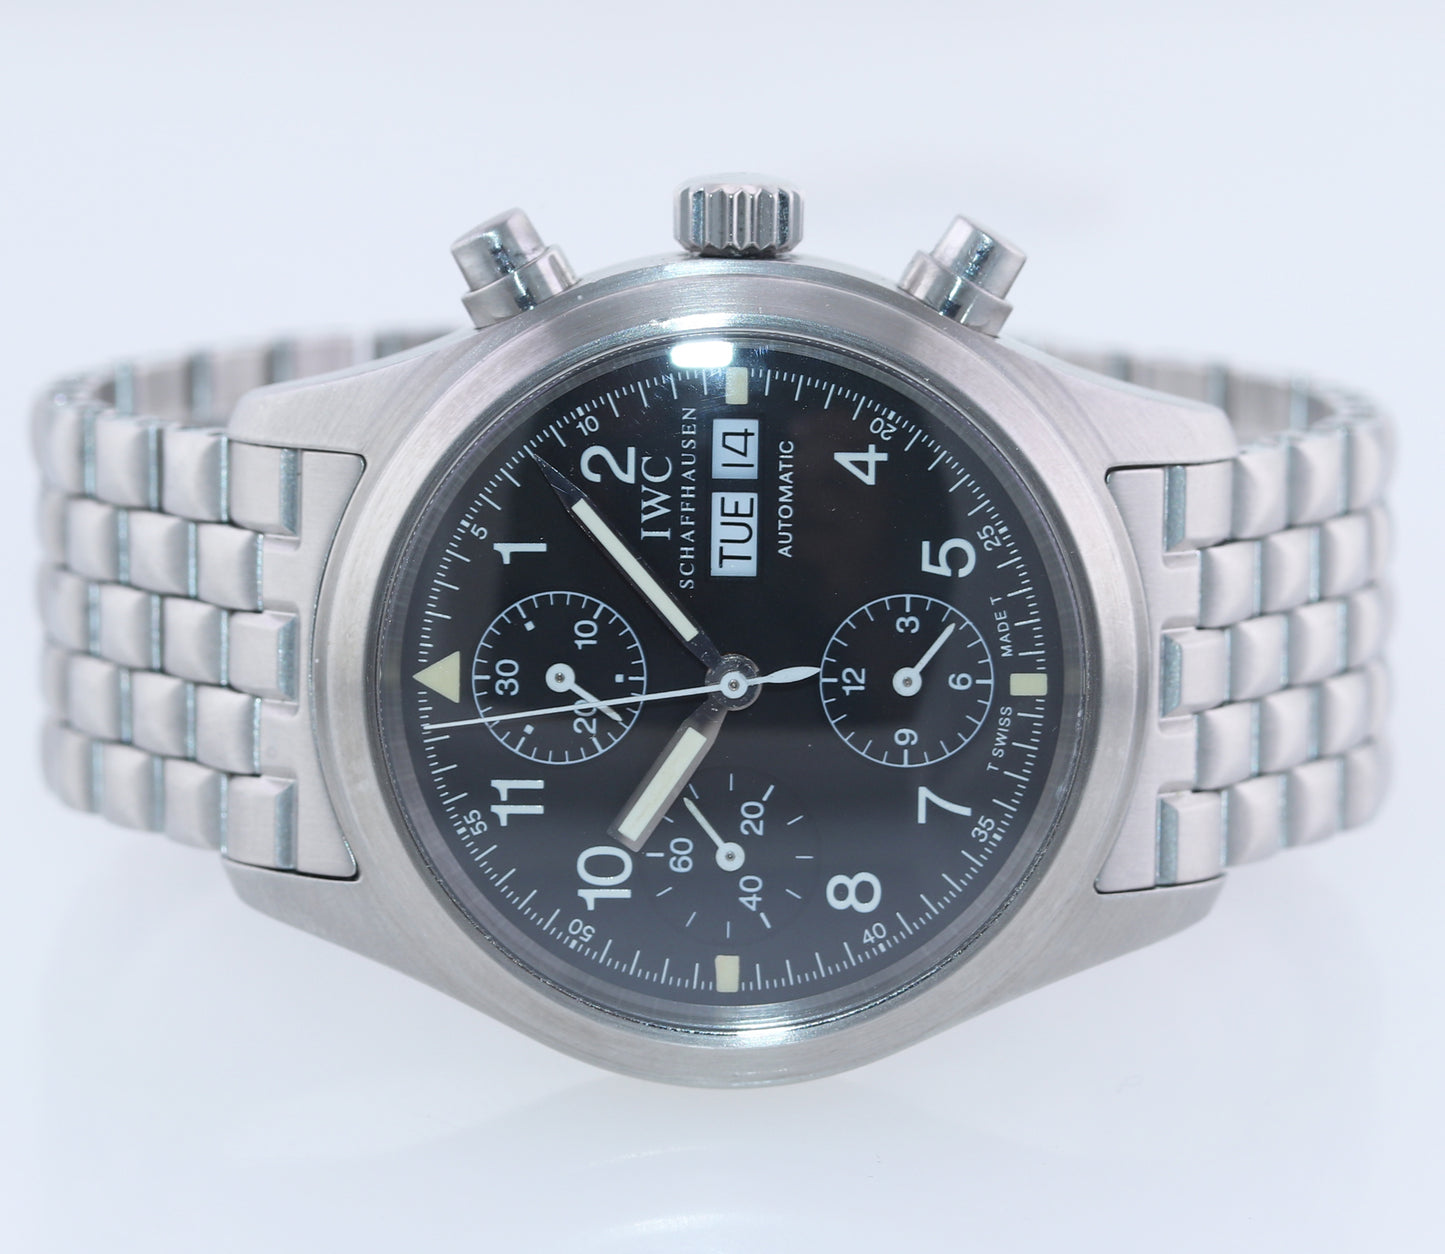 IWC Pilot Date Day Flieger Chronograph Black 39mm Steel Automatic IW370607 Watch